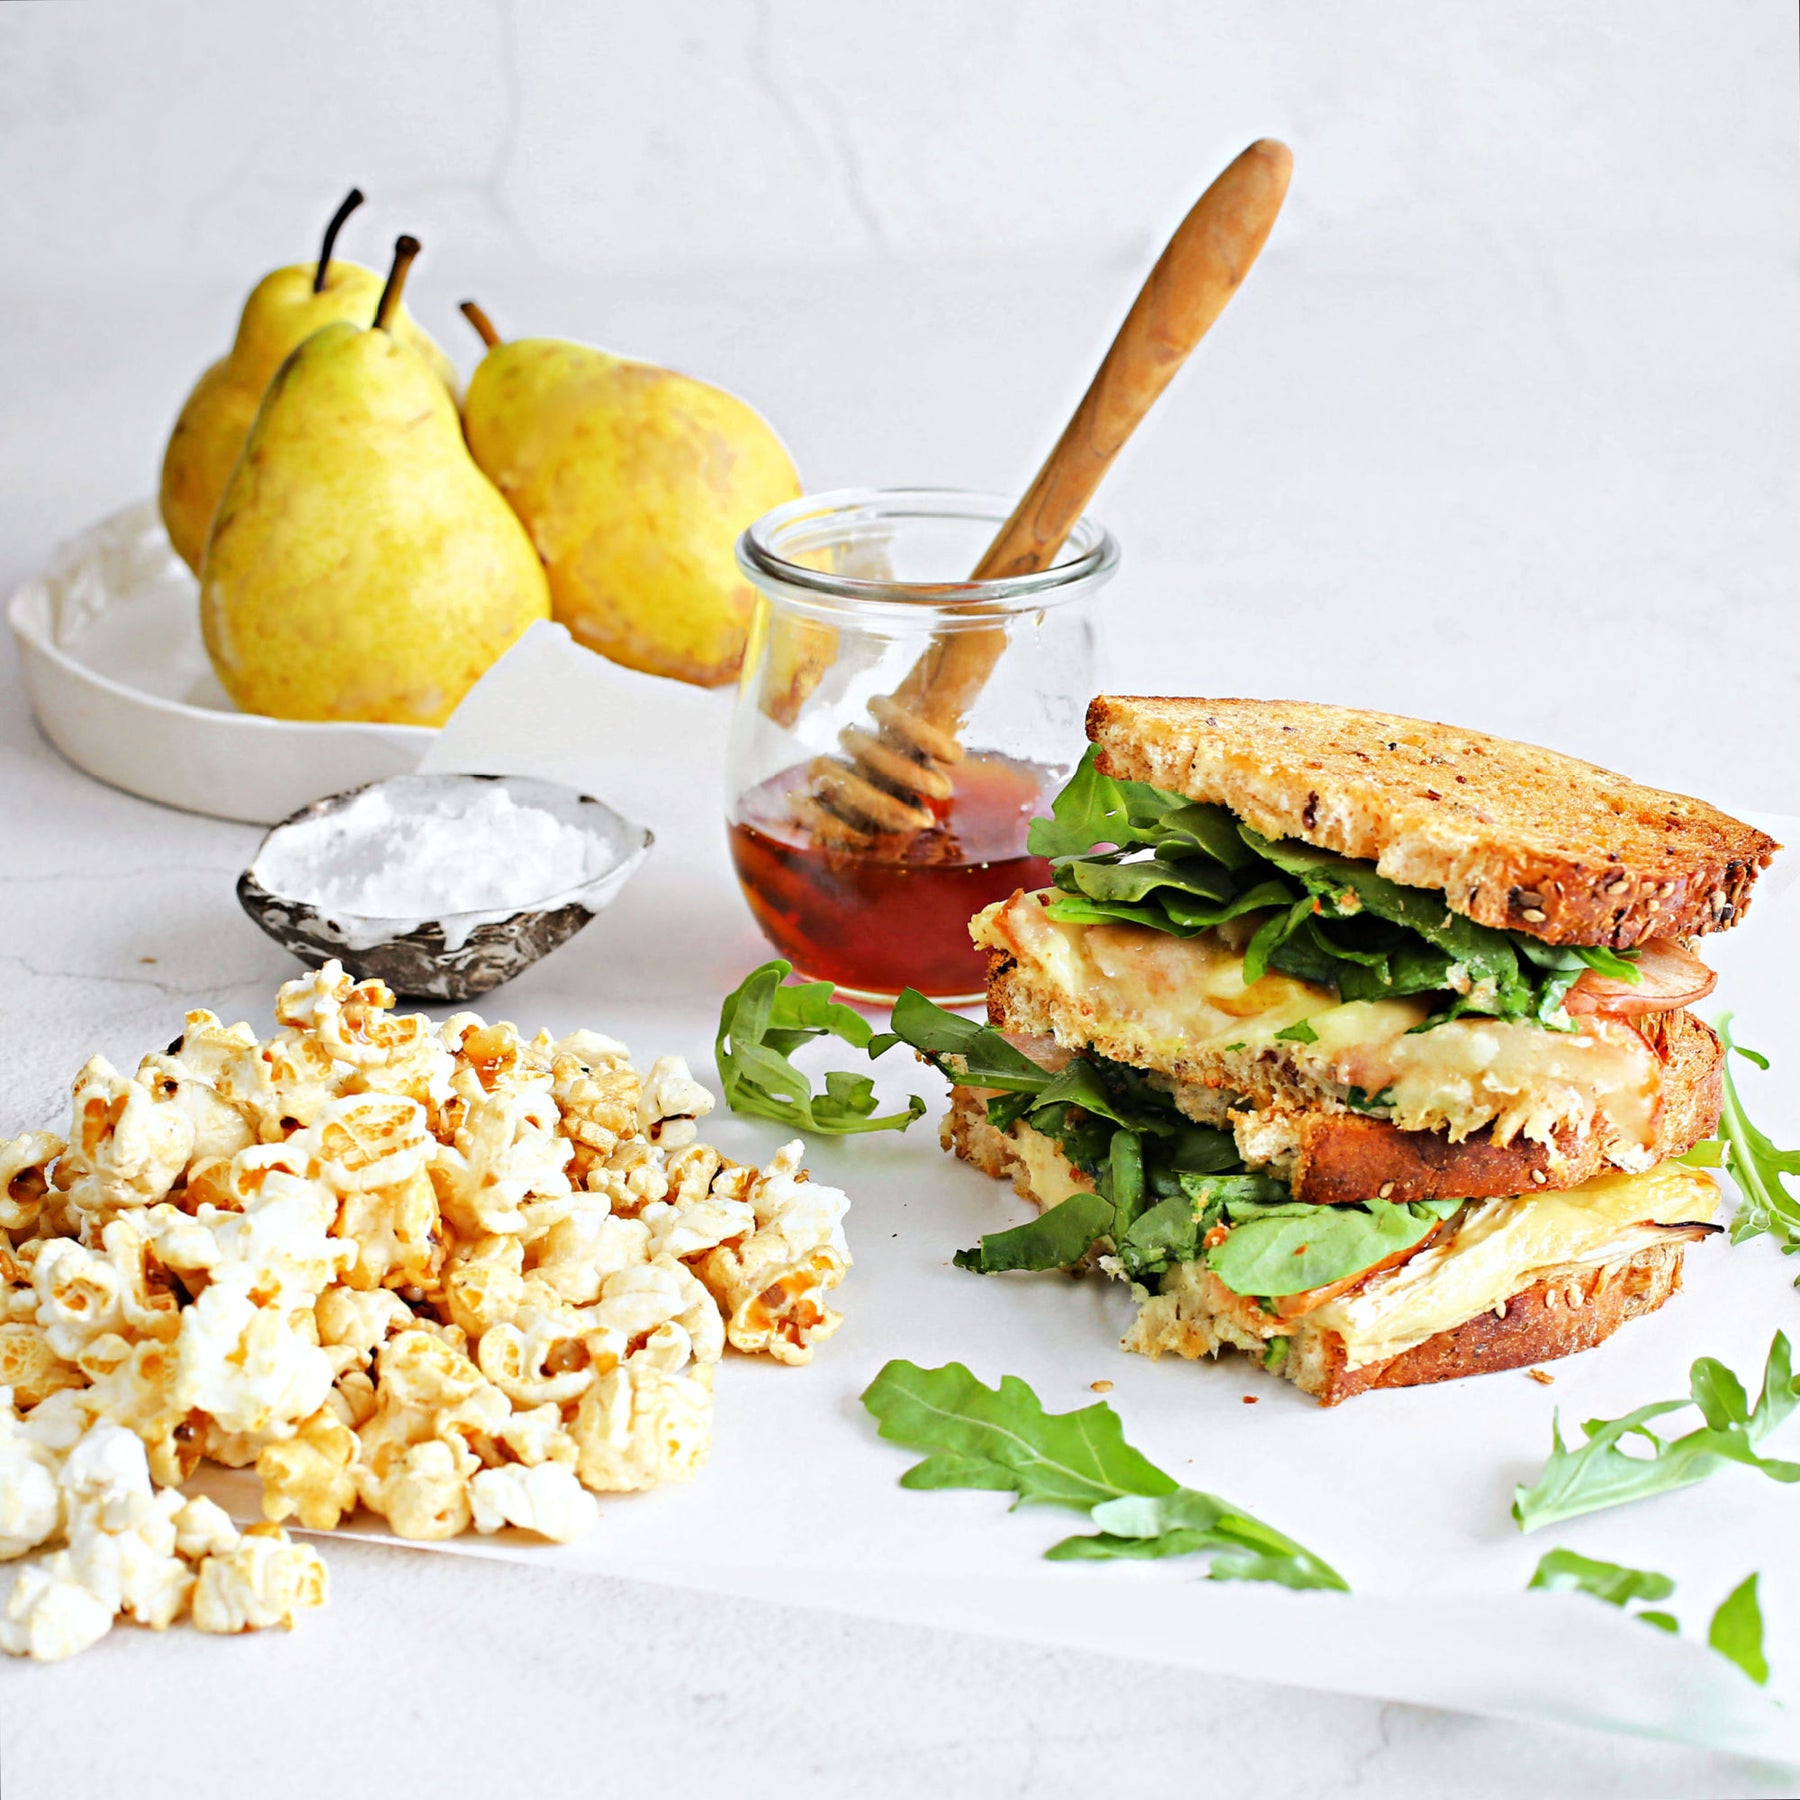 Pear and Brie Sandwich with Popcorn